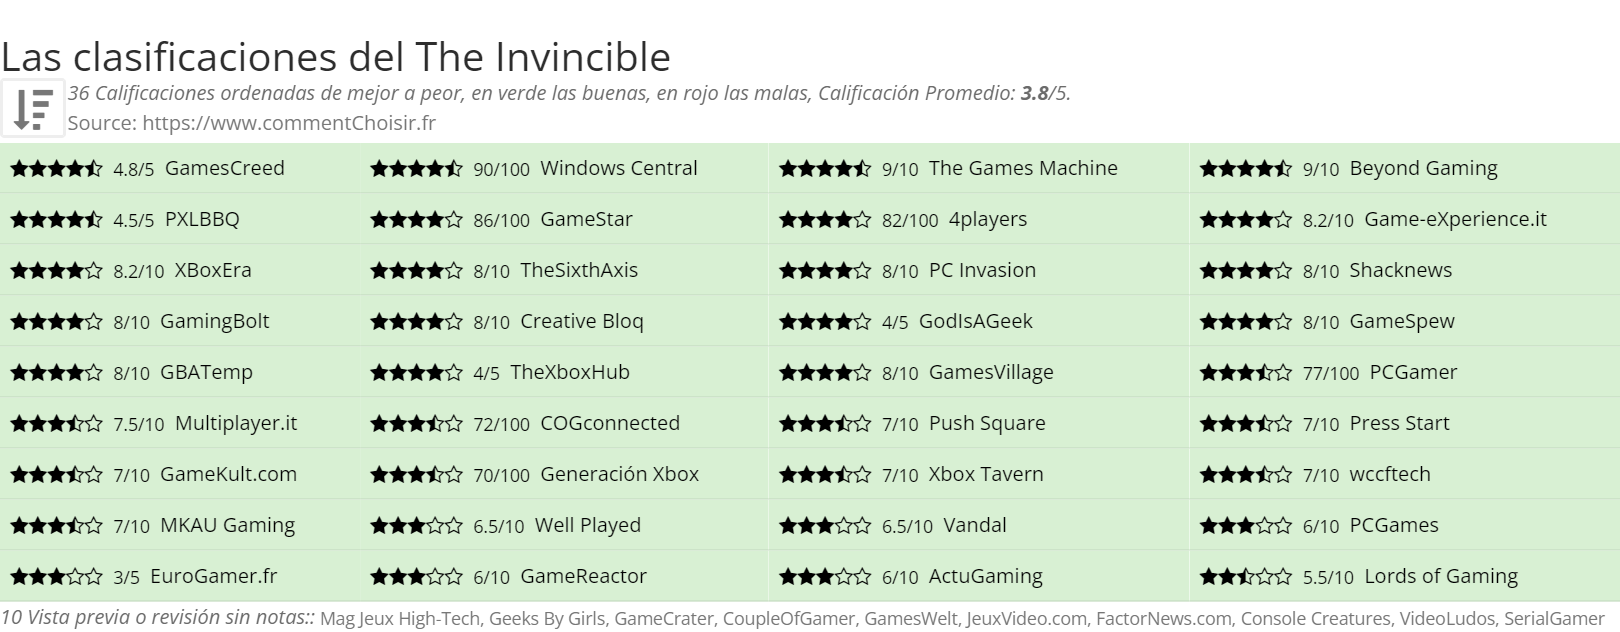 Ratings The Invincible